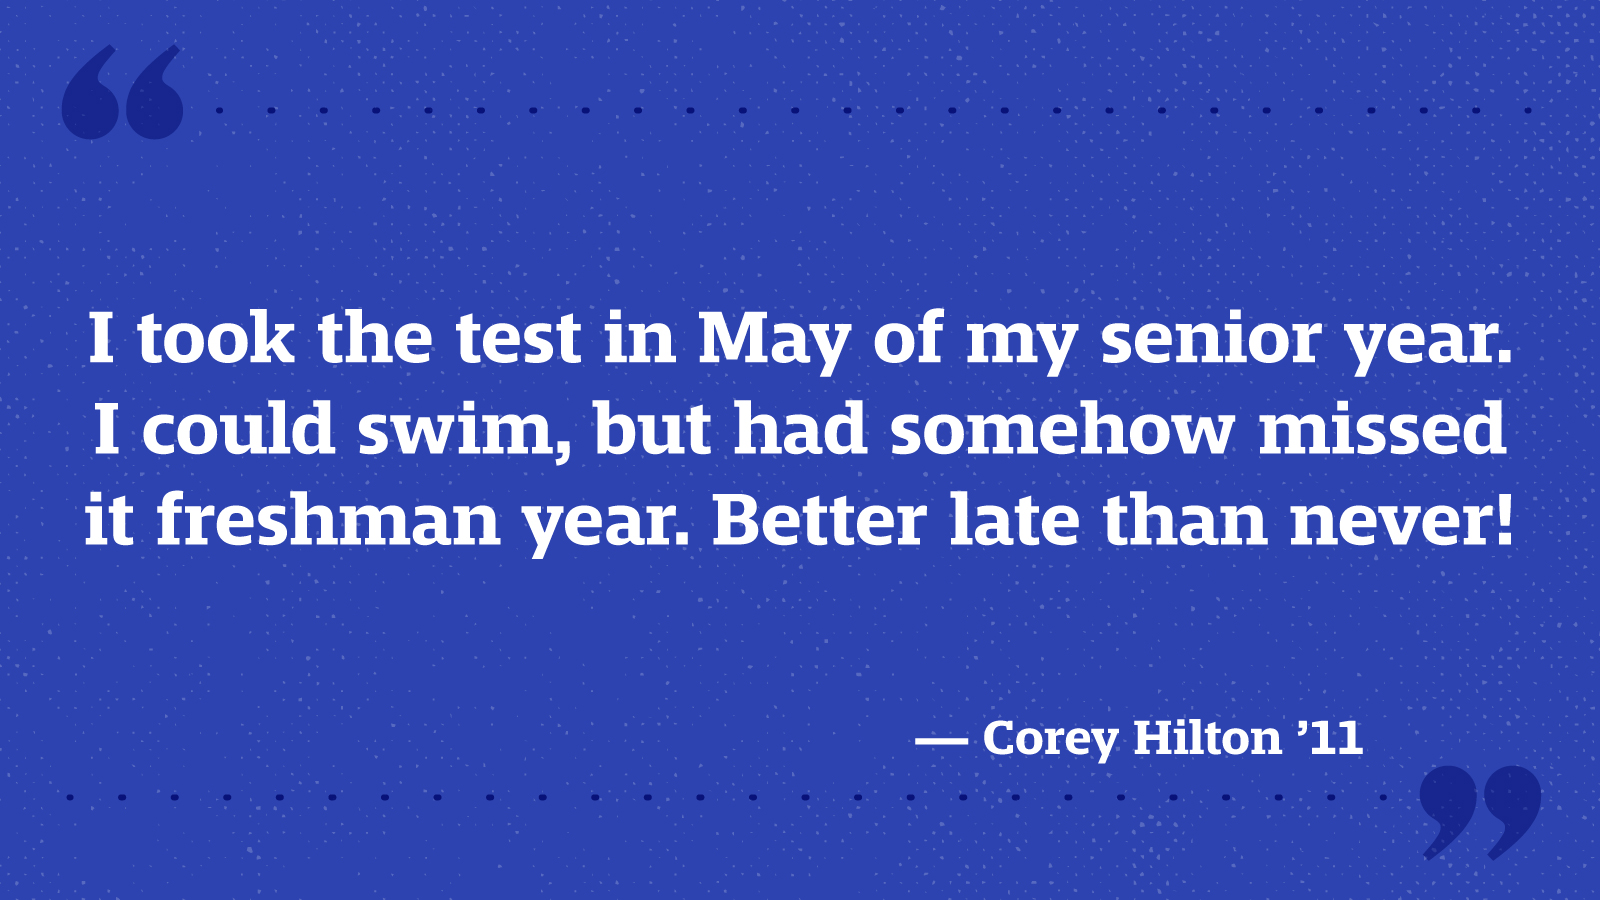 I took the test in May of my senior year. I could swim, but had somehow missed it freshman year. Better late than never! — Corey Hilton ’11